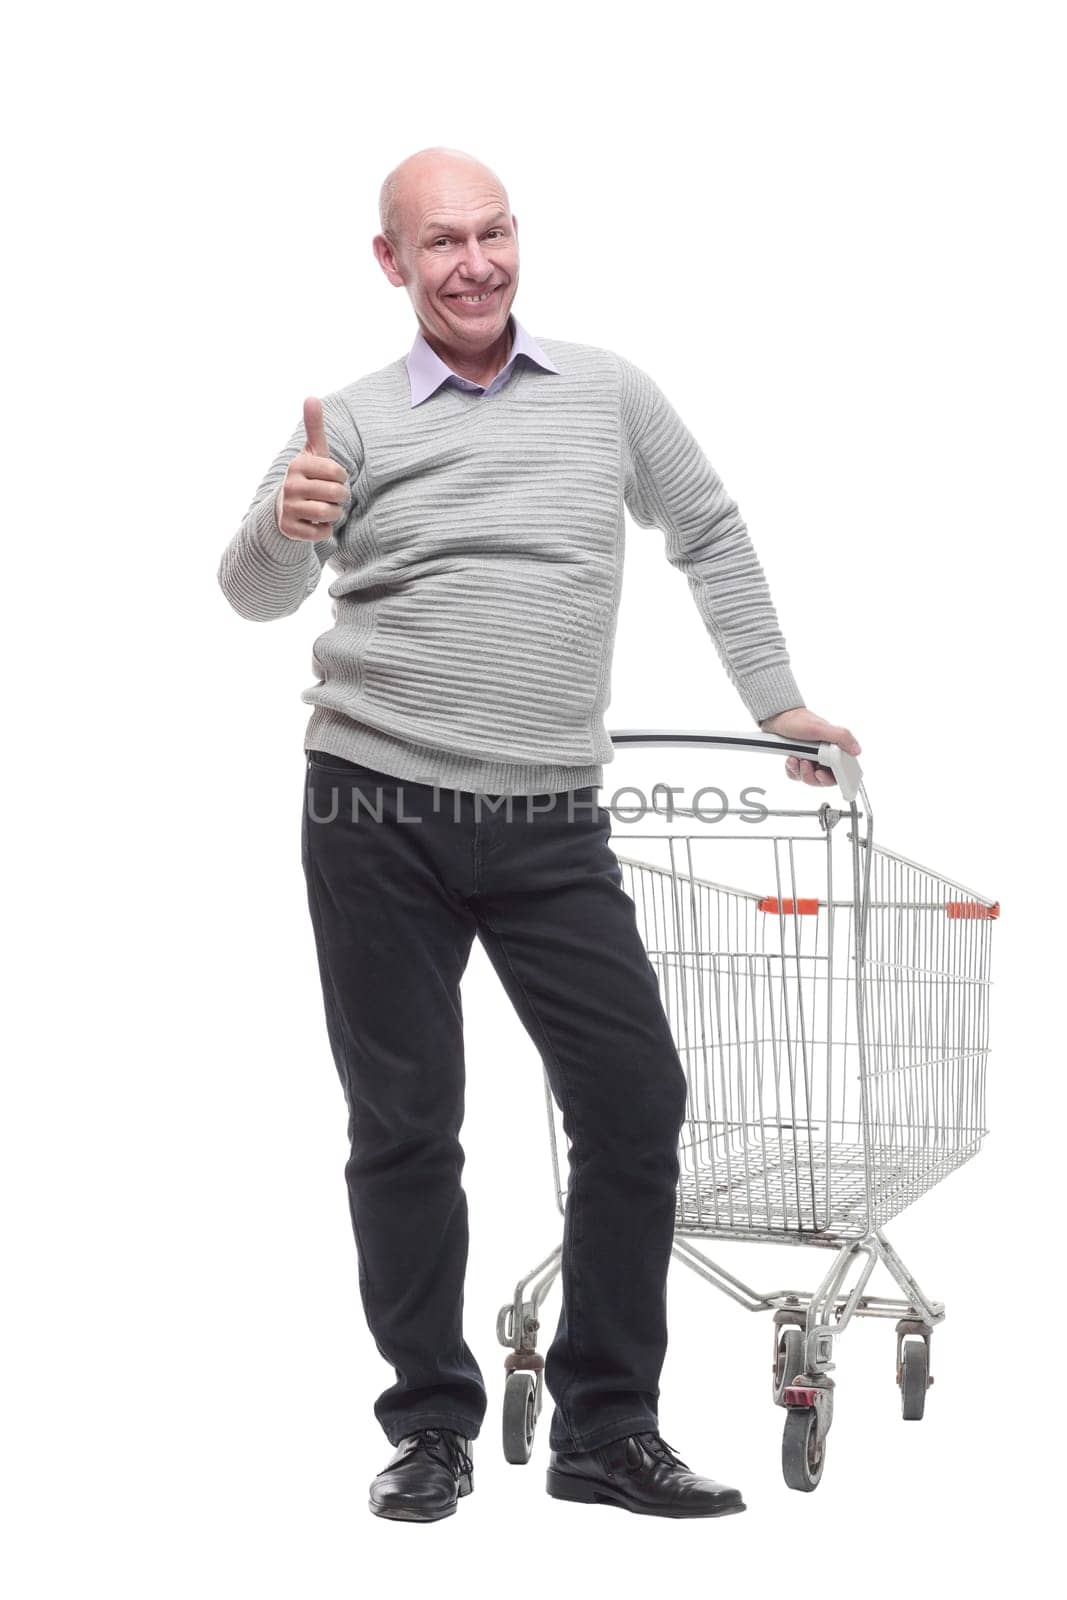 in full growth. a happy man with a shopping cart. isolated on a white background.